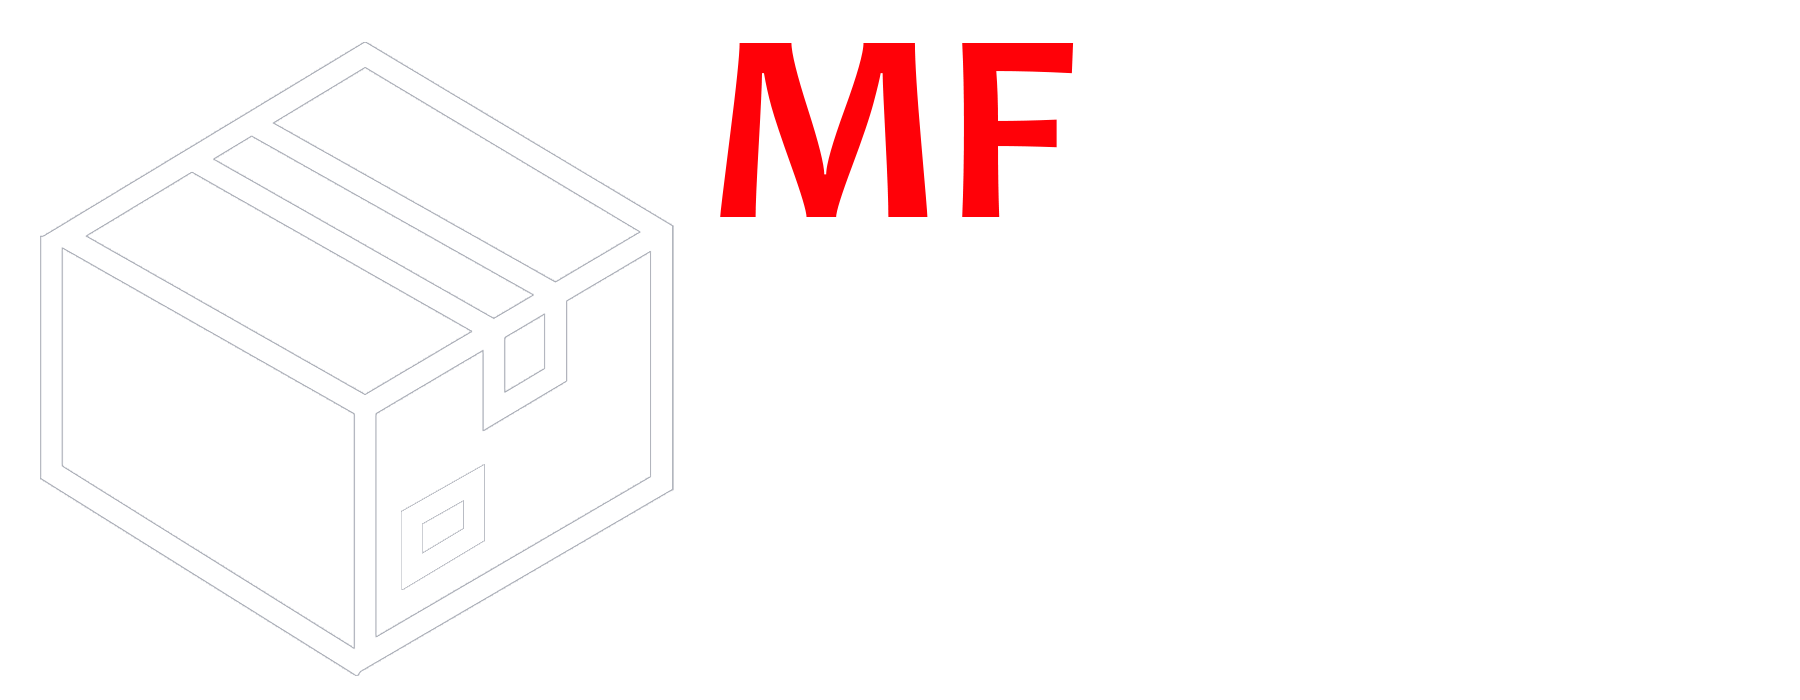 MF Couriers